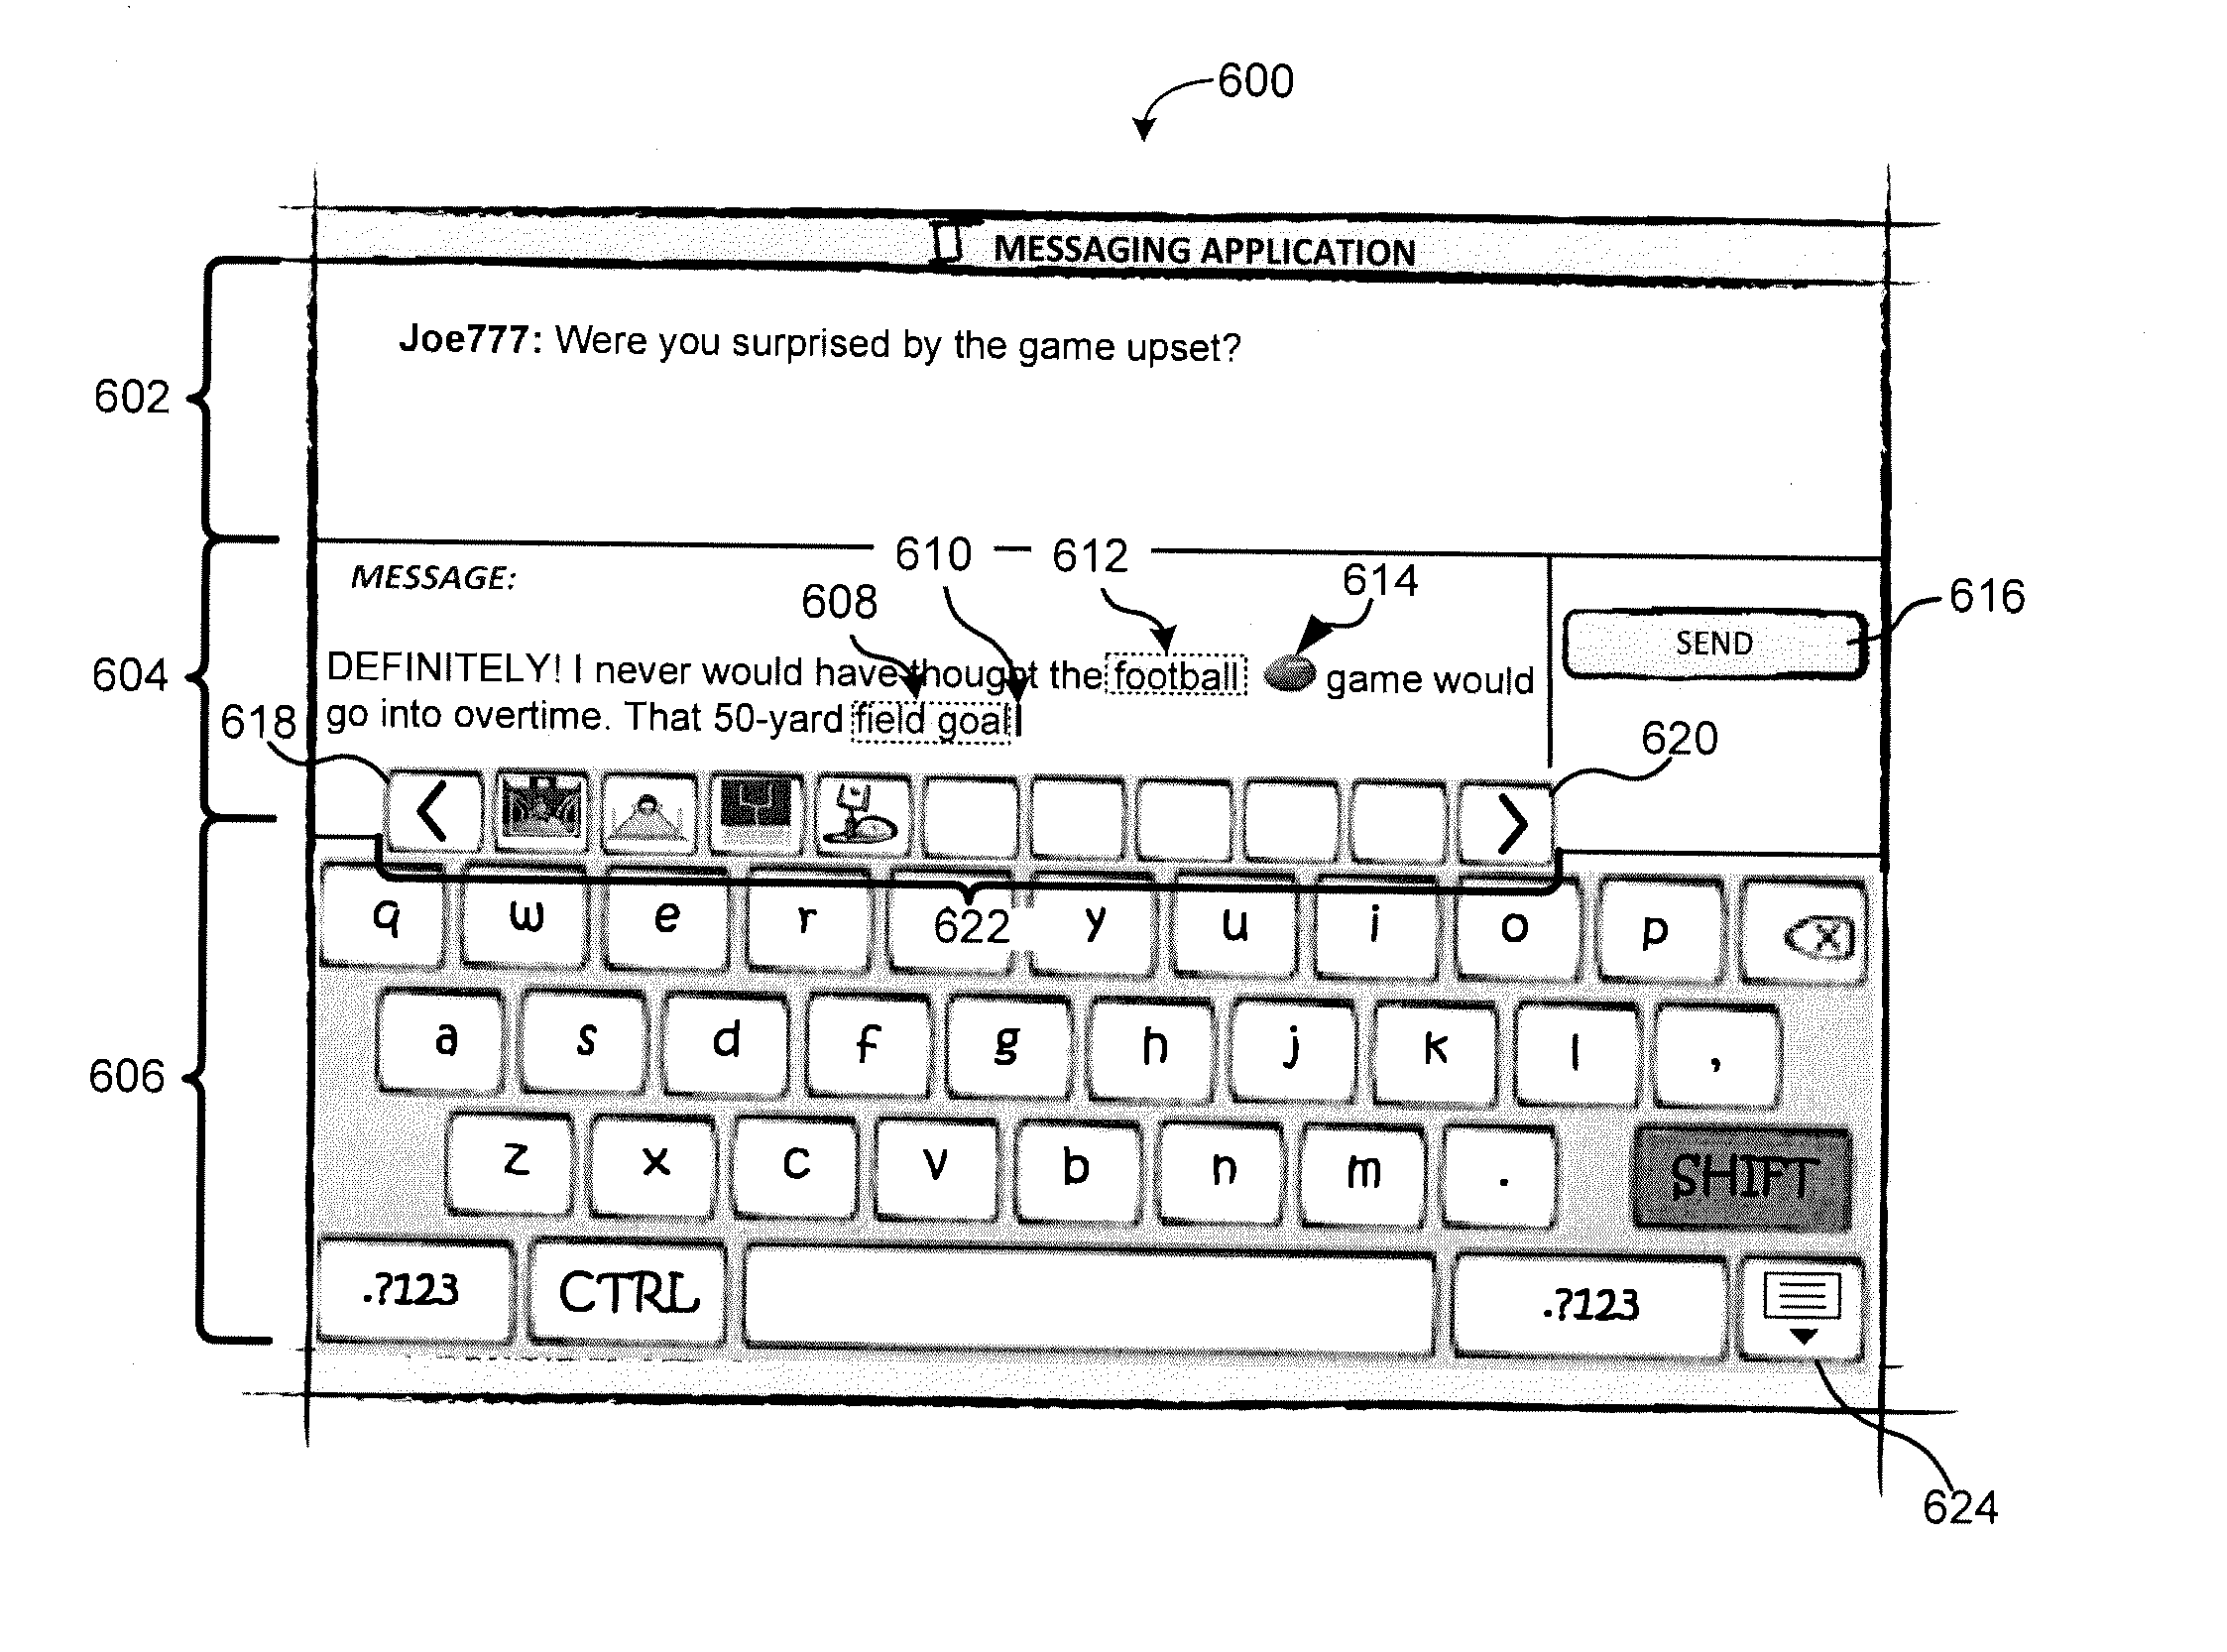 Systems and Methods for Identifying and Suggesting Emoticons